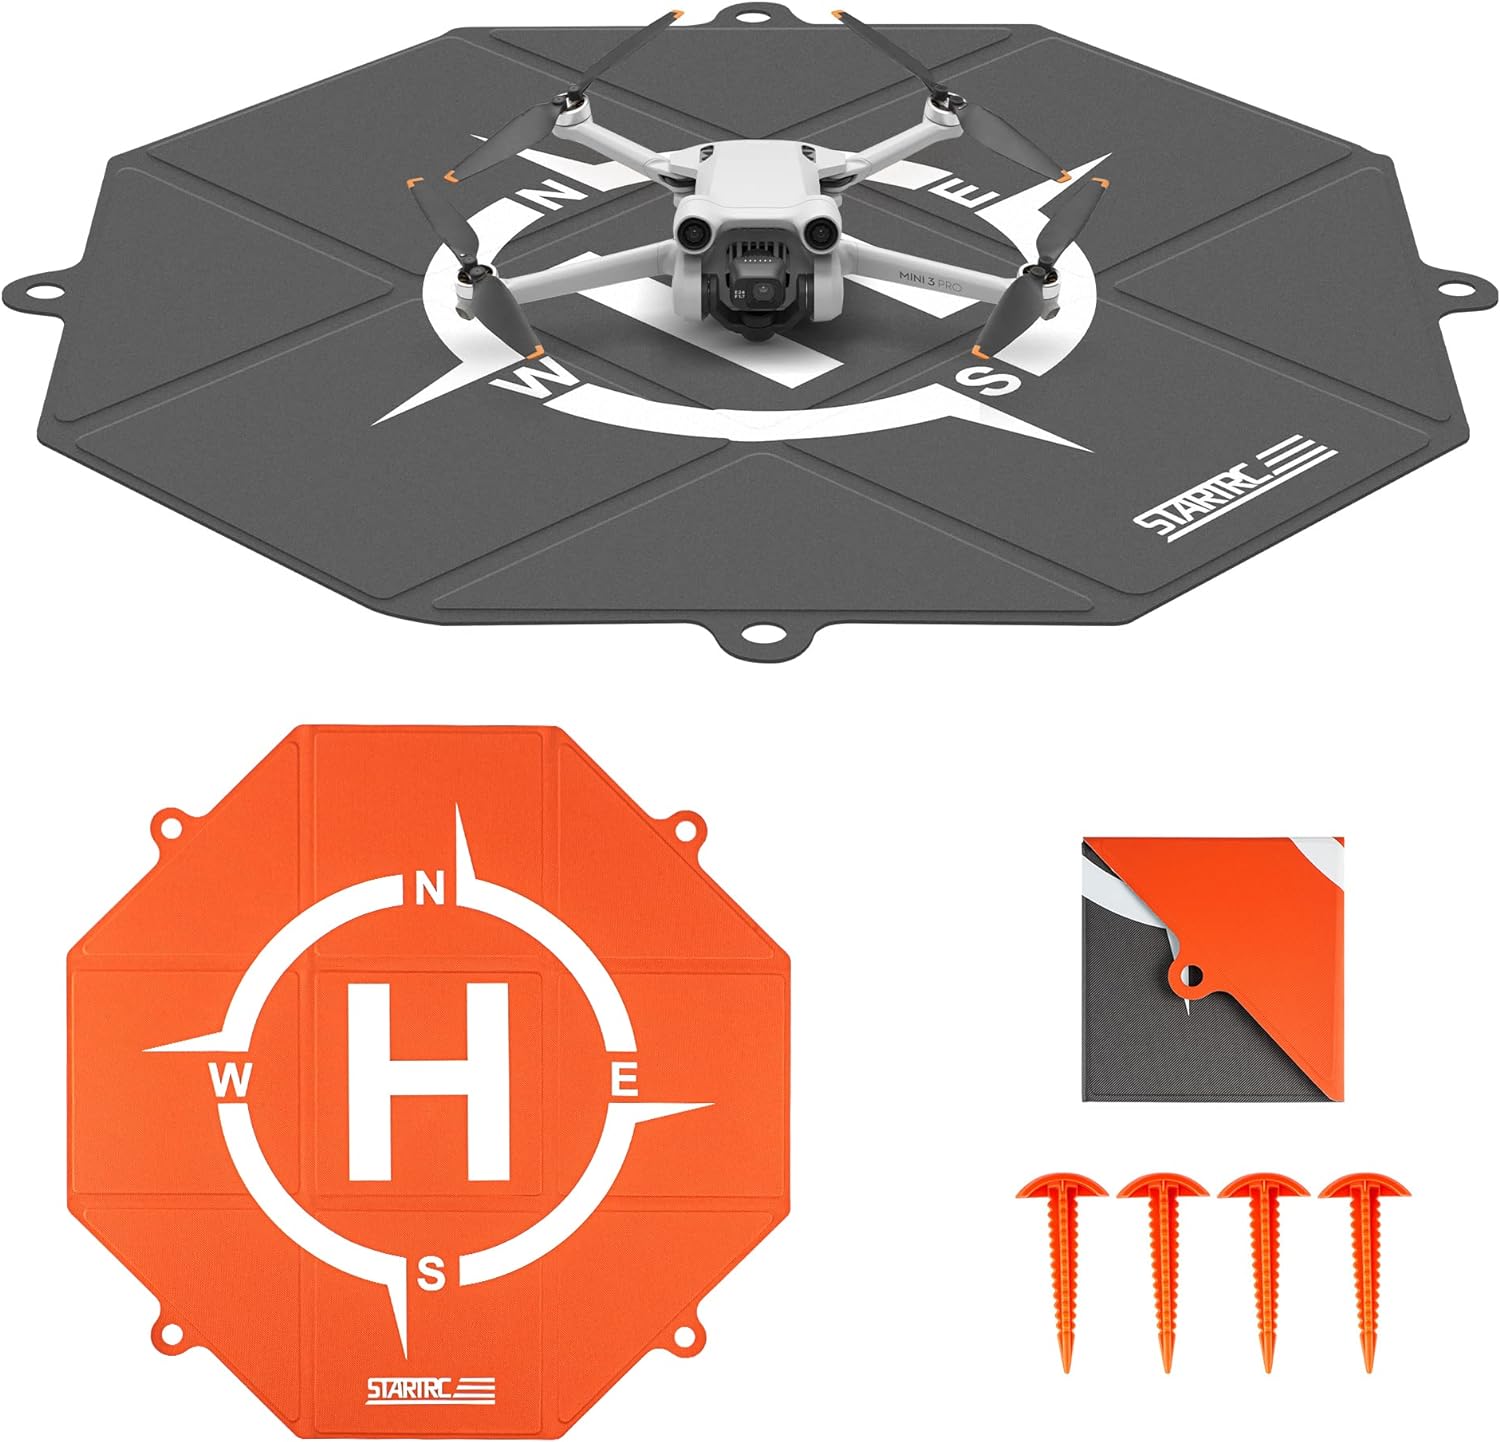 STARTRC Drone Landing Pad: The Perfect Landing Surface for Your DJI Drones